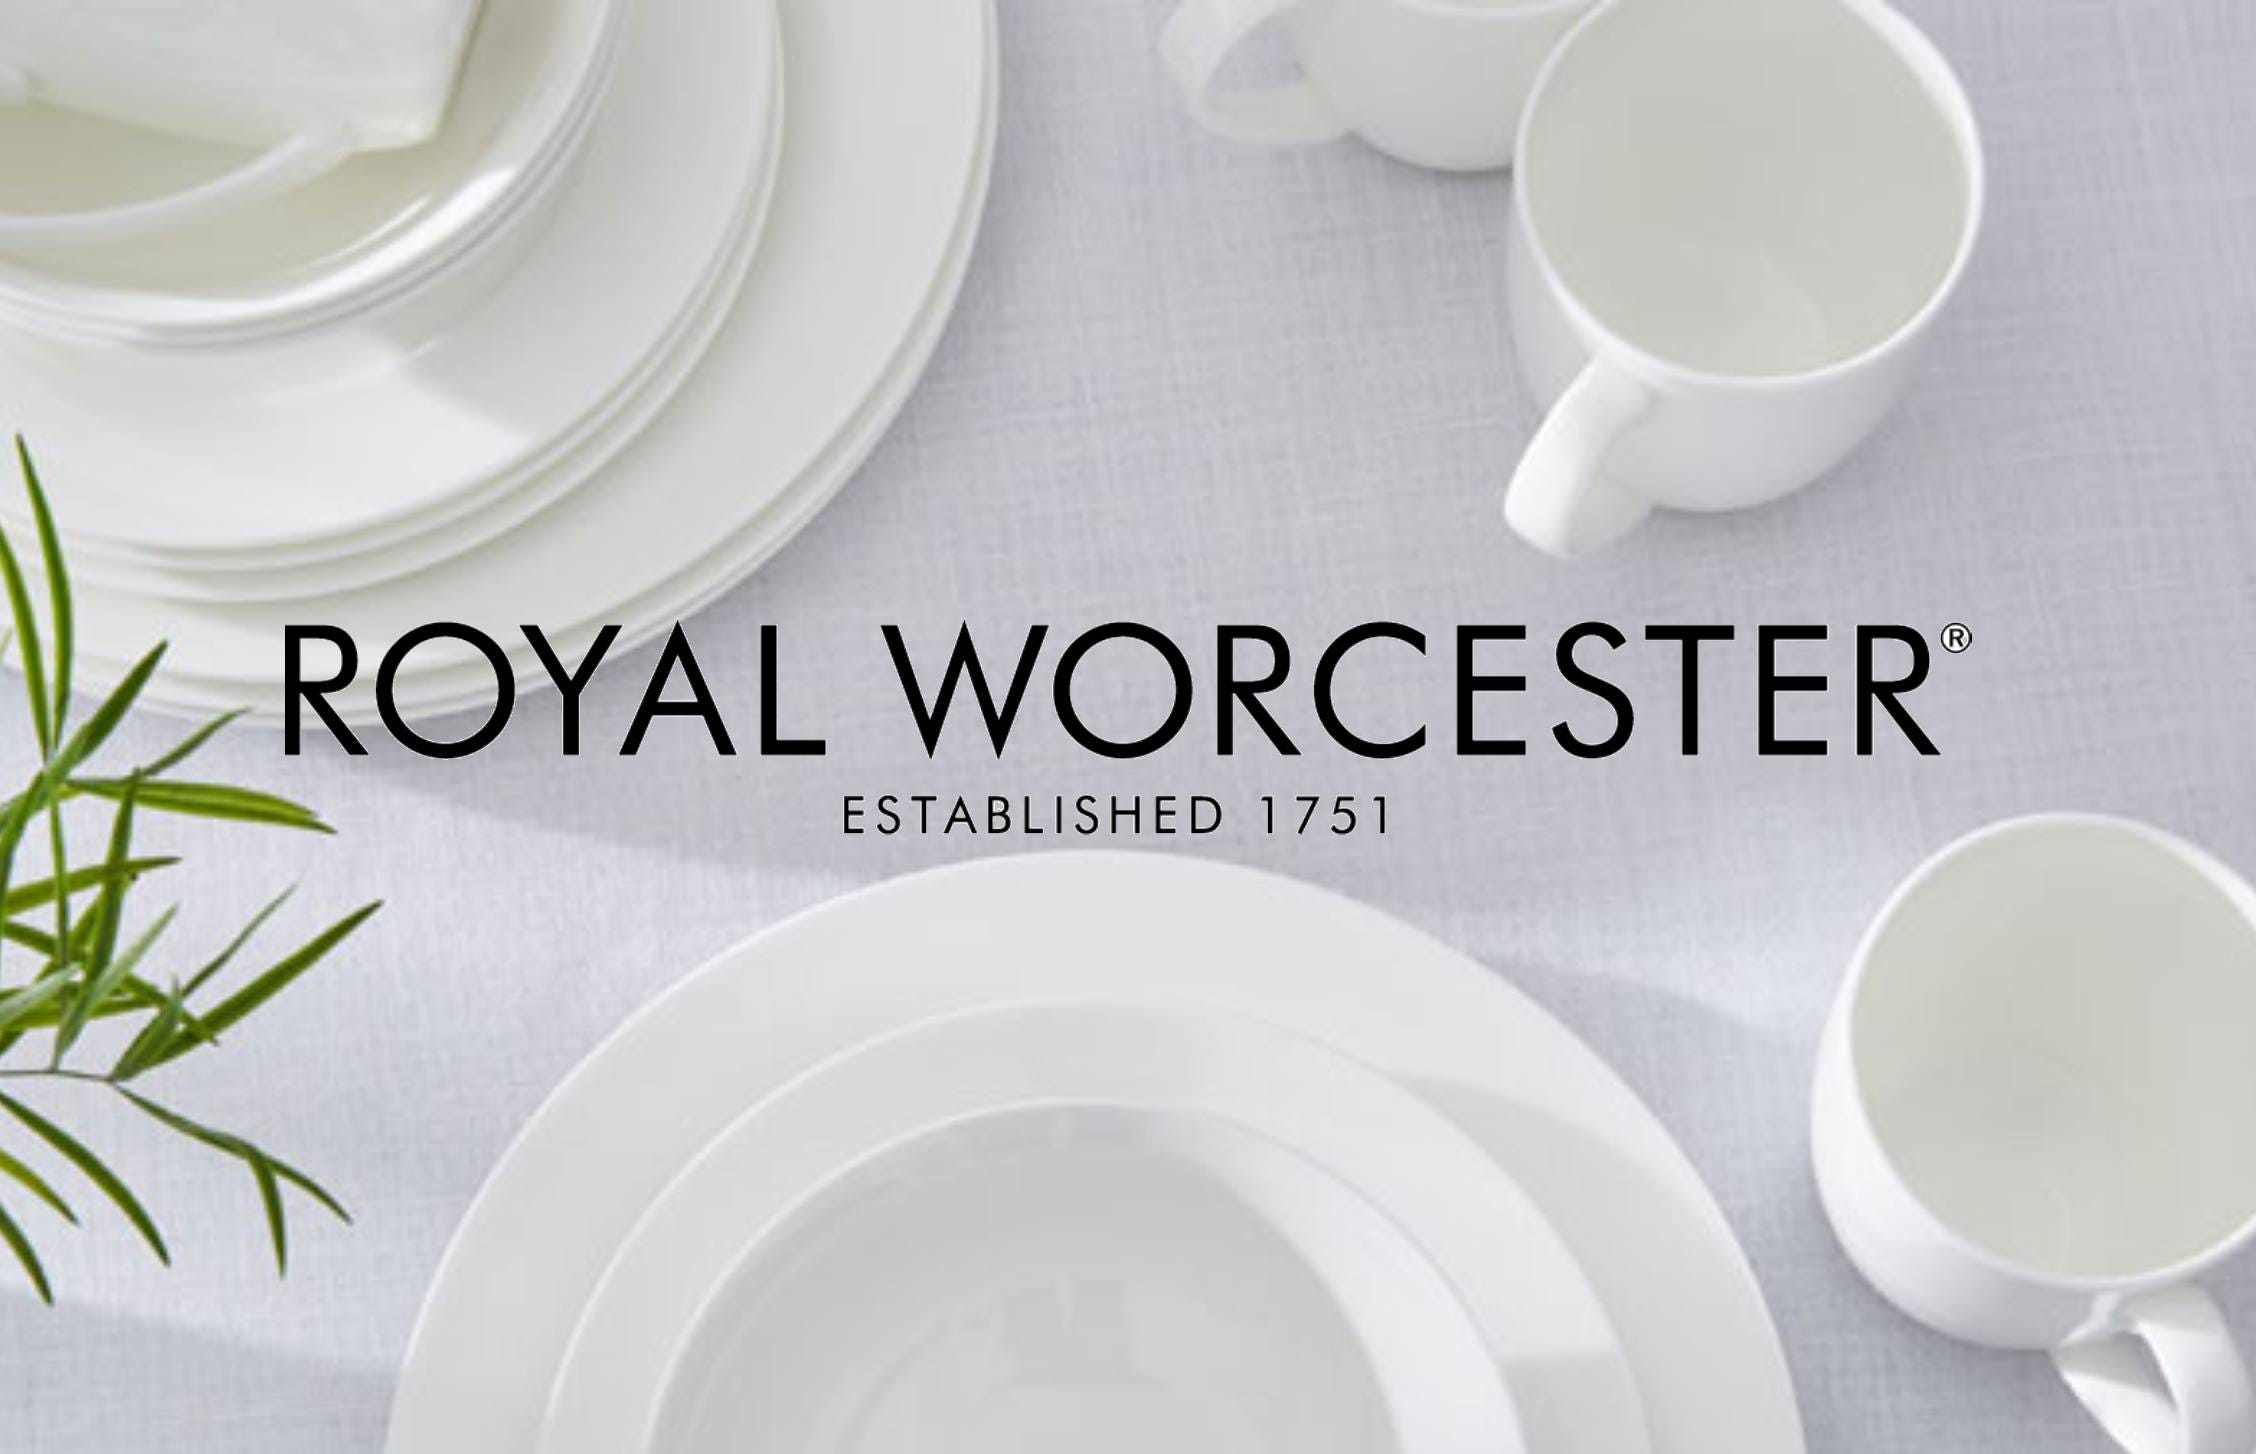 Welcome to Royal Worcester